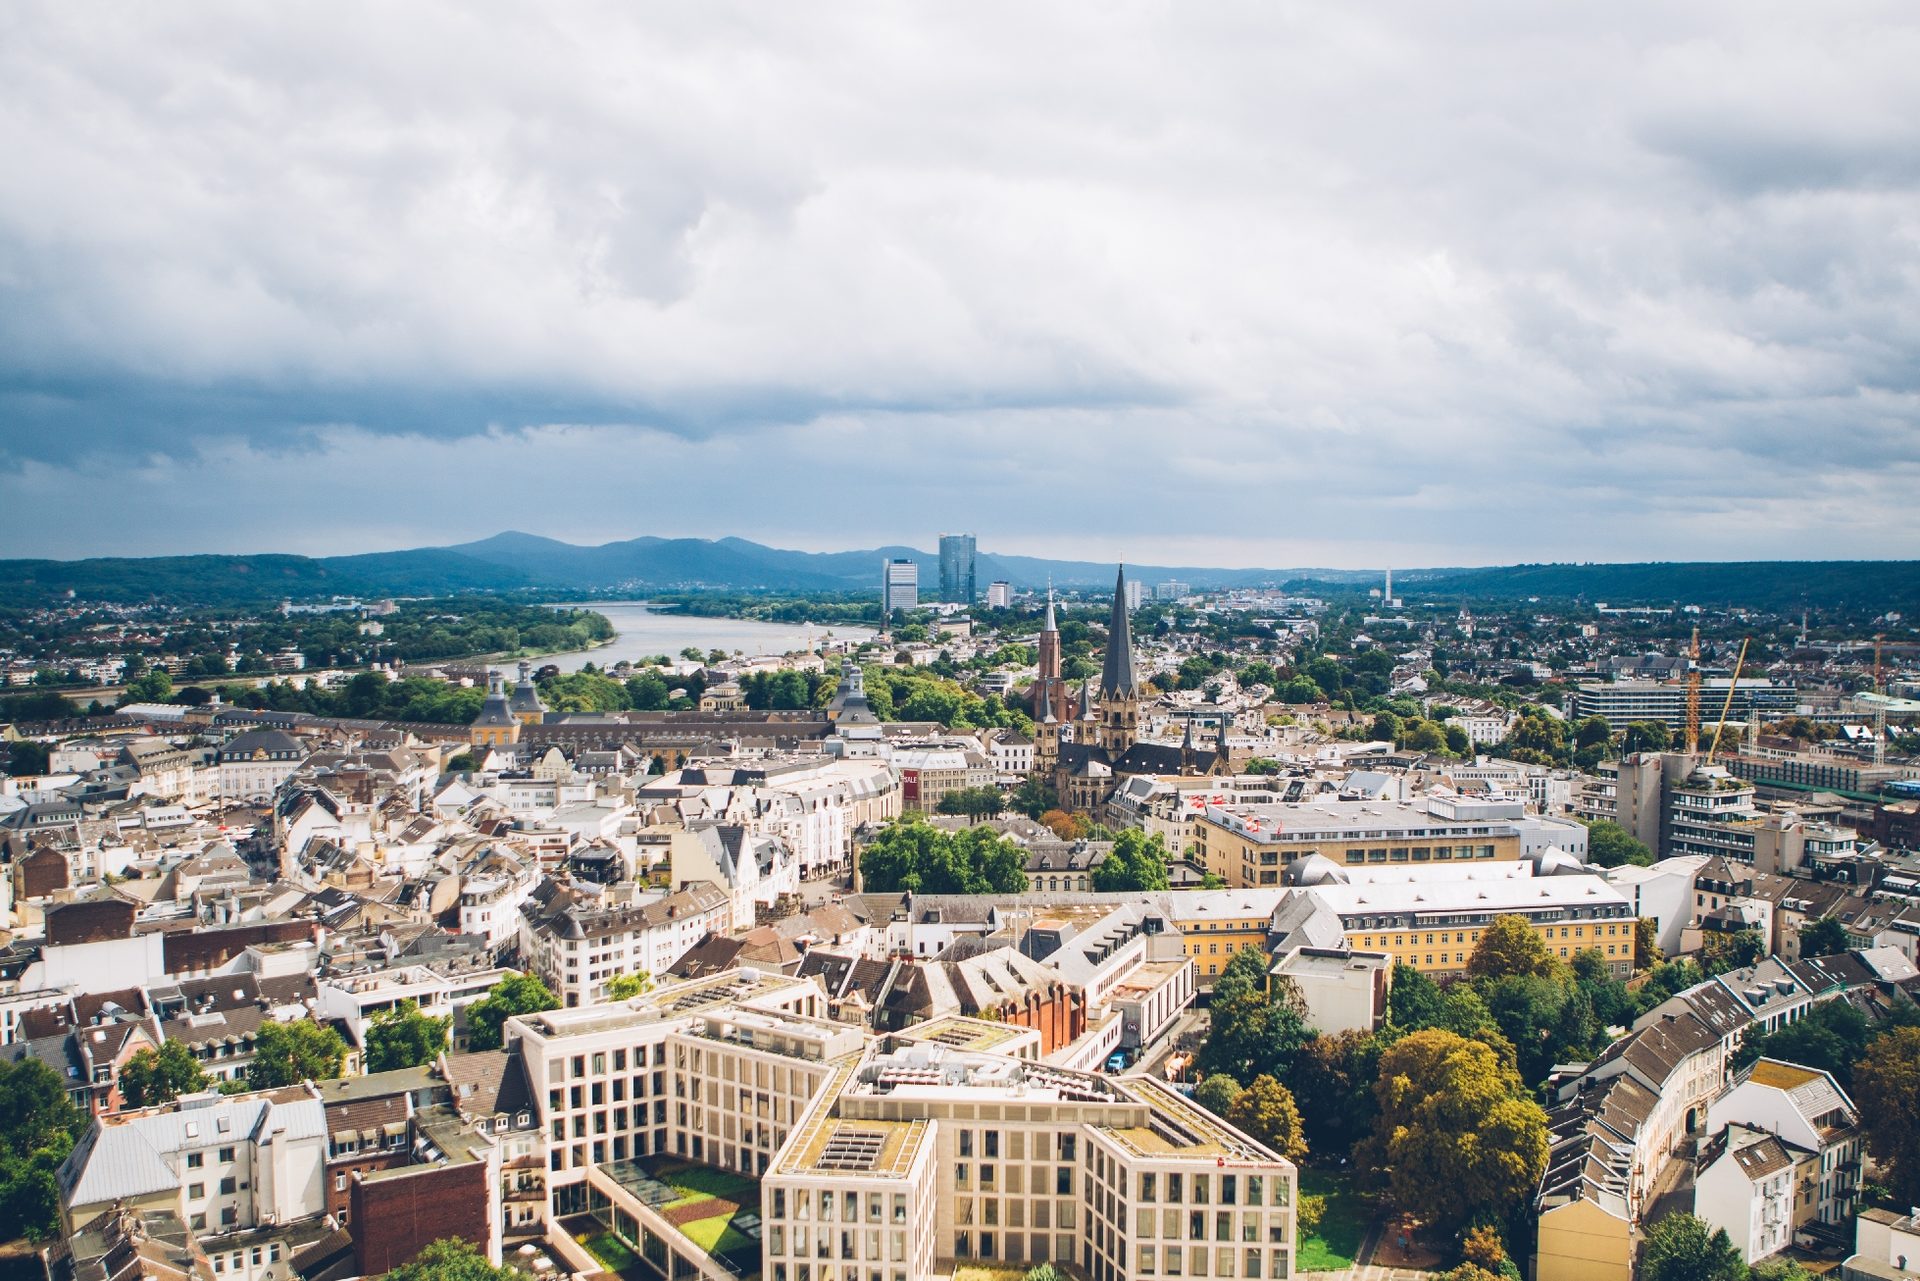 The city of Bonn from above